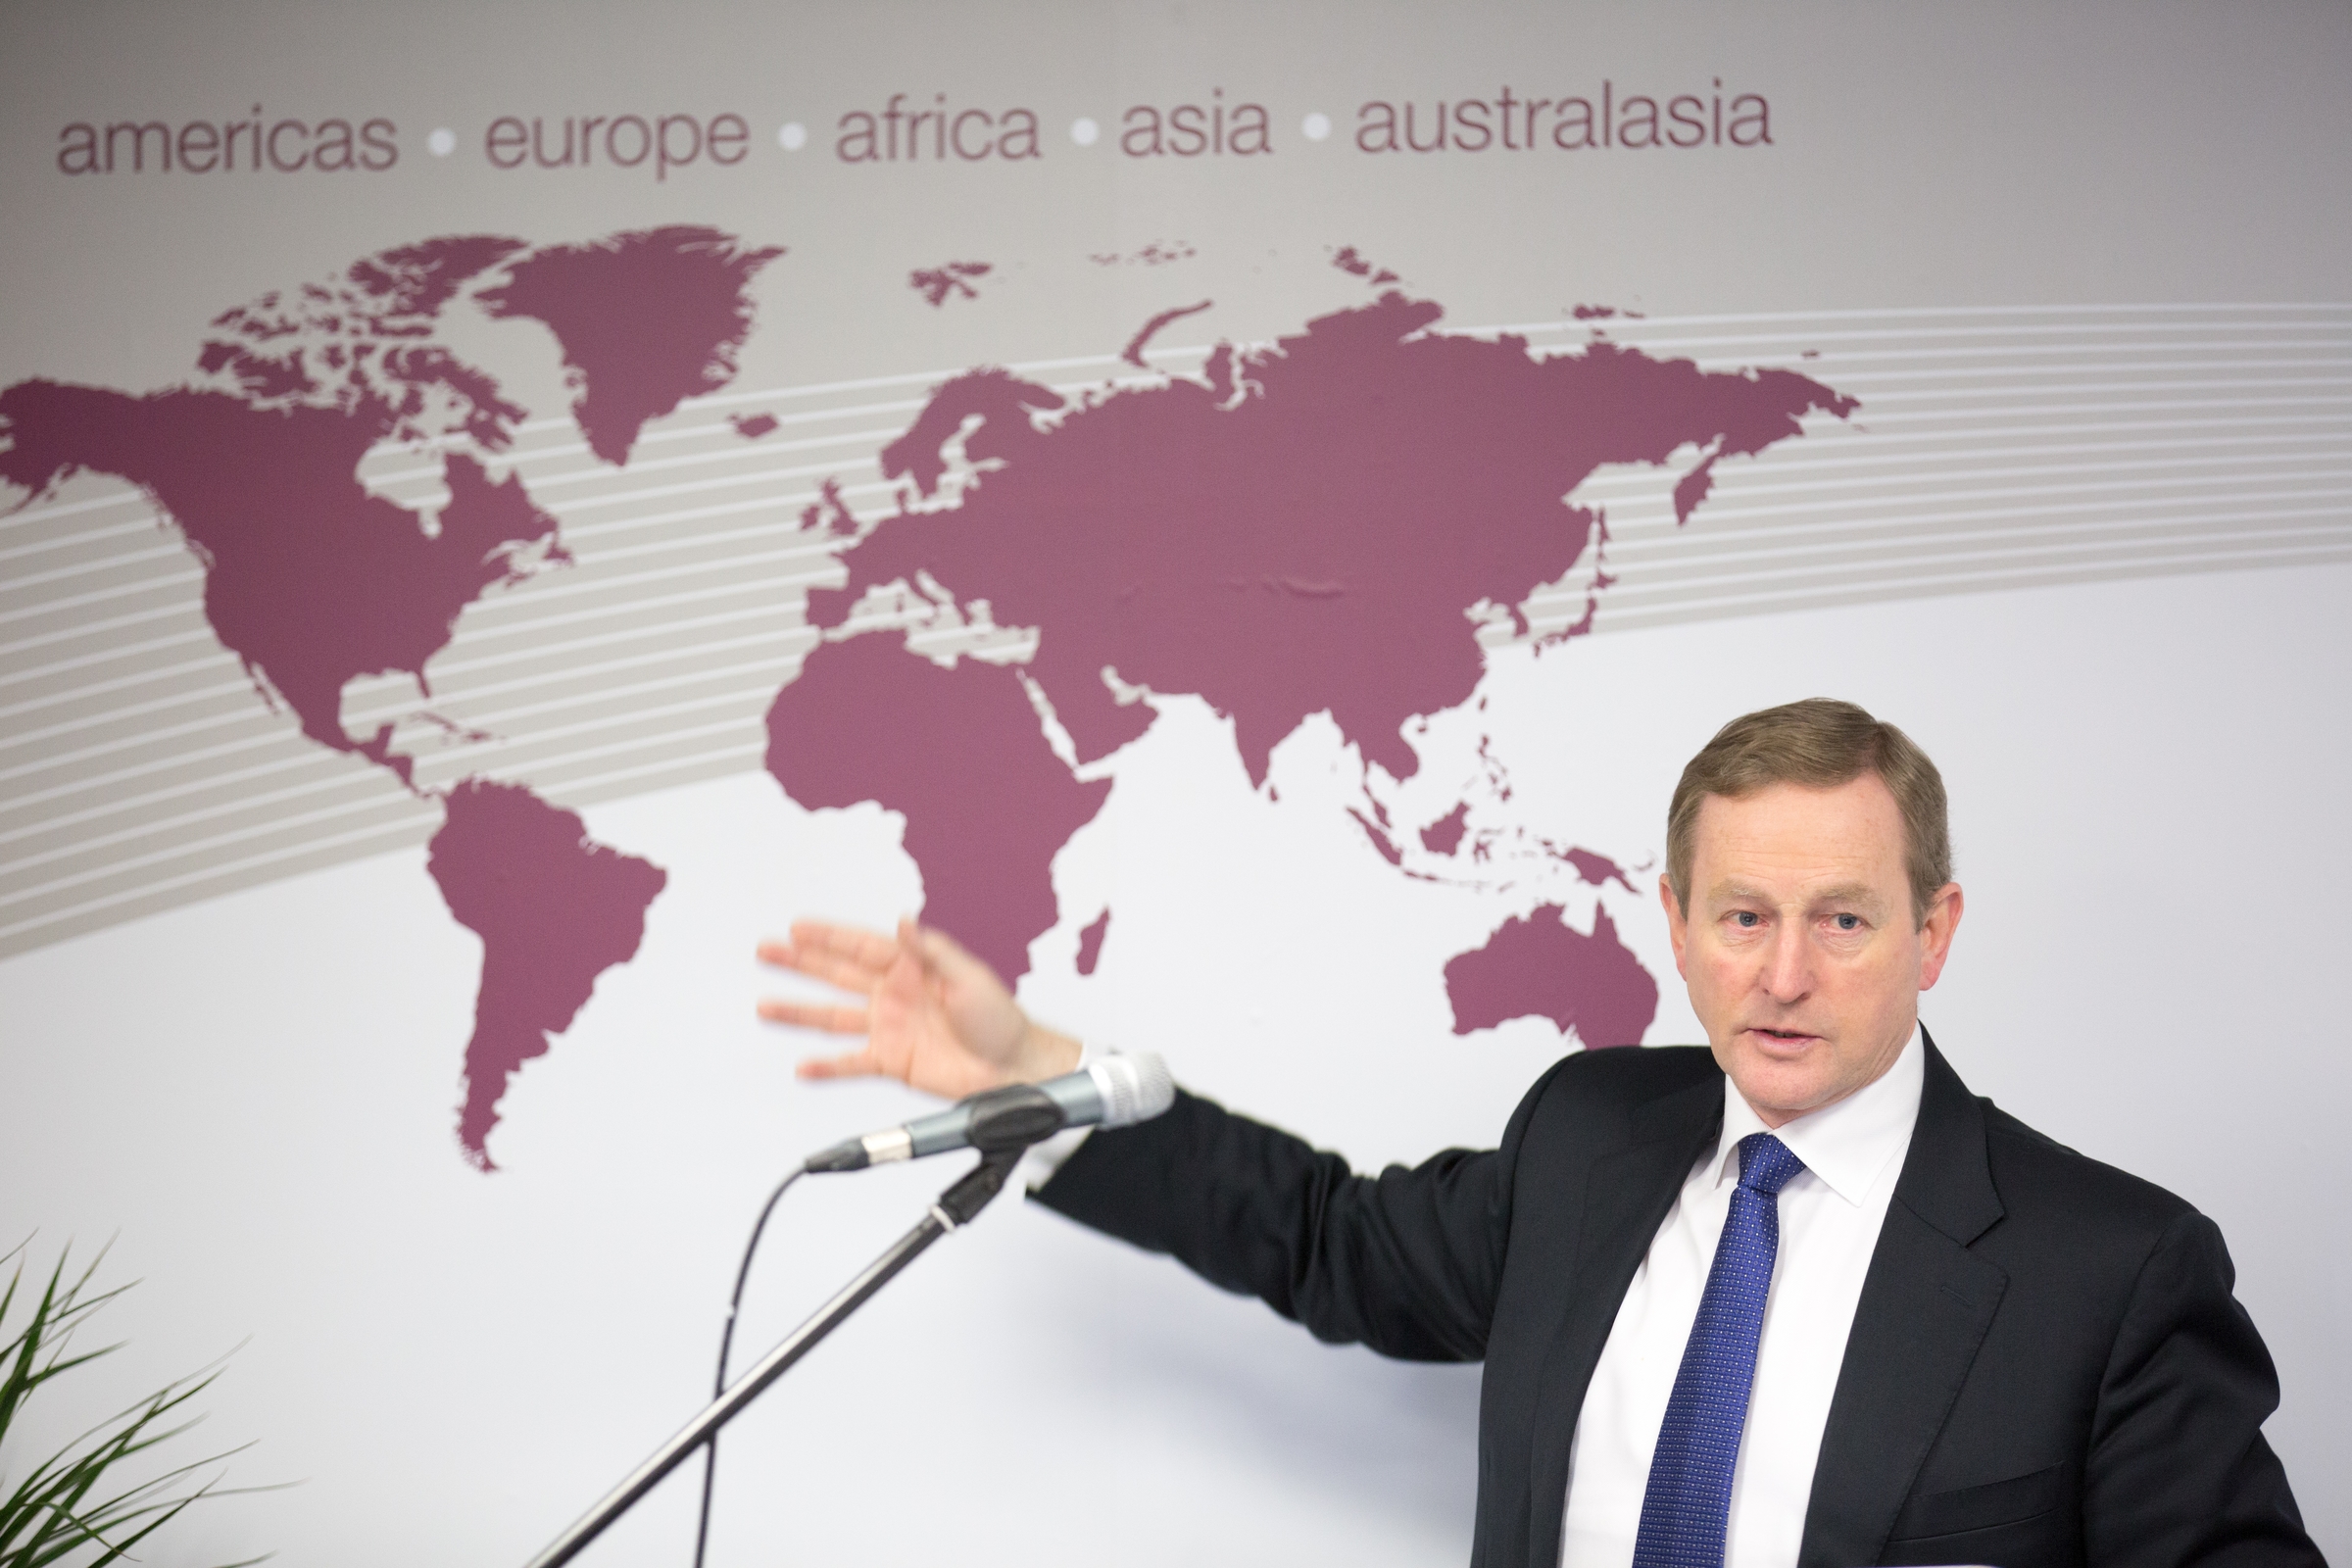 20/02/2016 An Taoiseach Enda Kenny officially opening the new BNI global office in Castlebar, Co. Mayo. Photo : Keith Heneghan / Phocus.